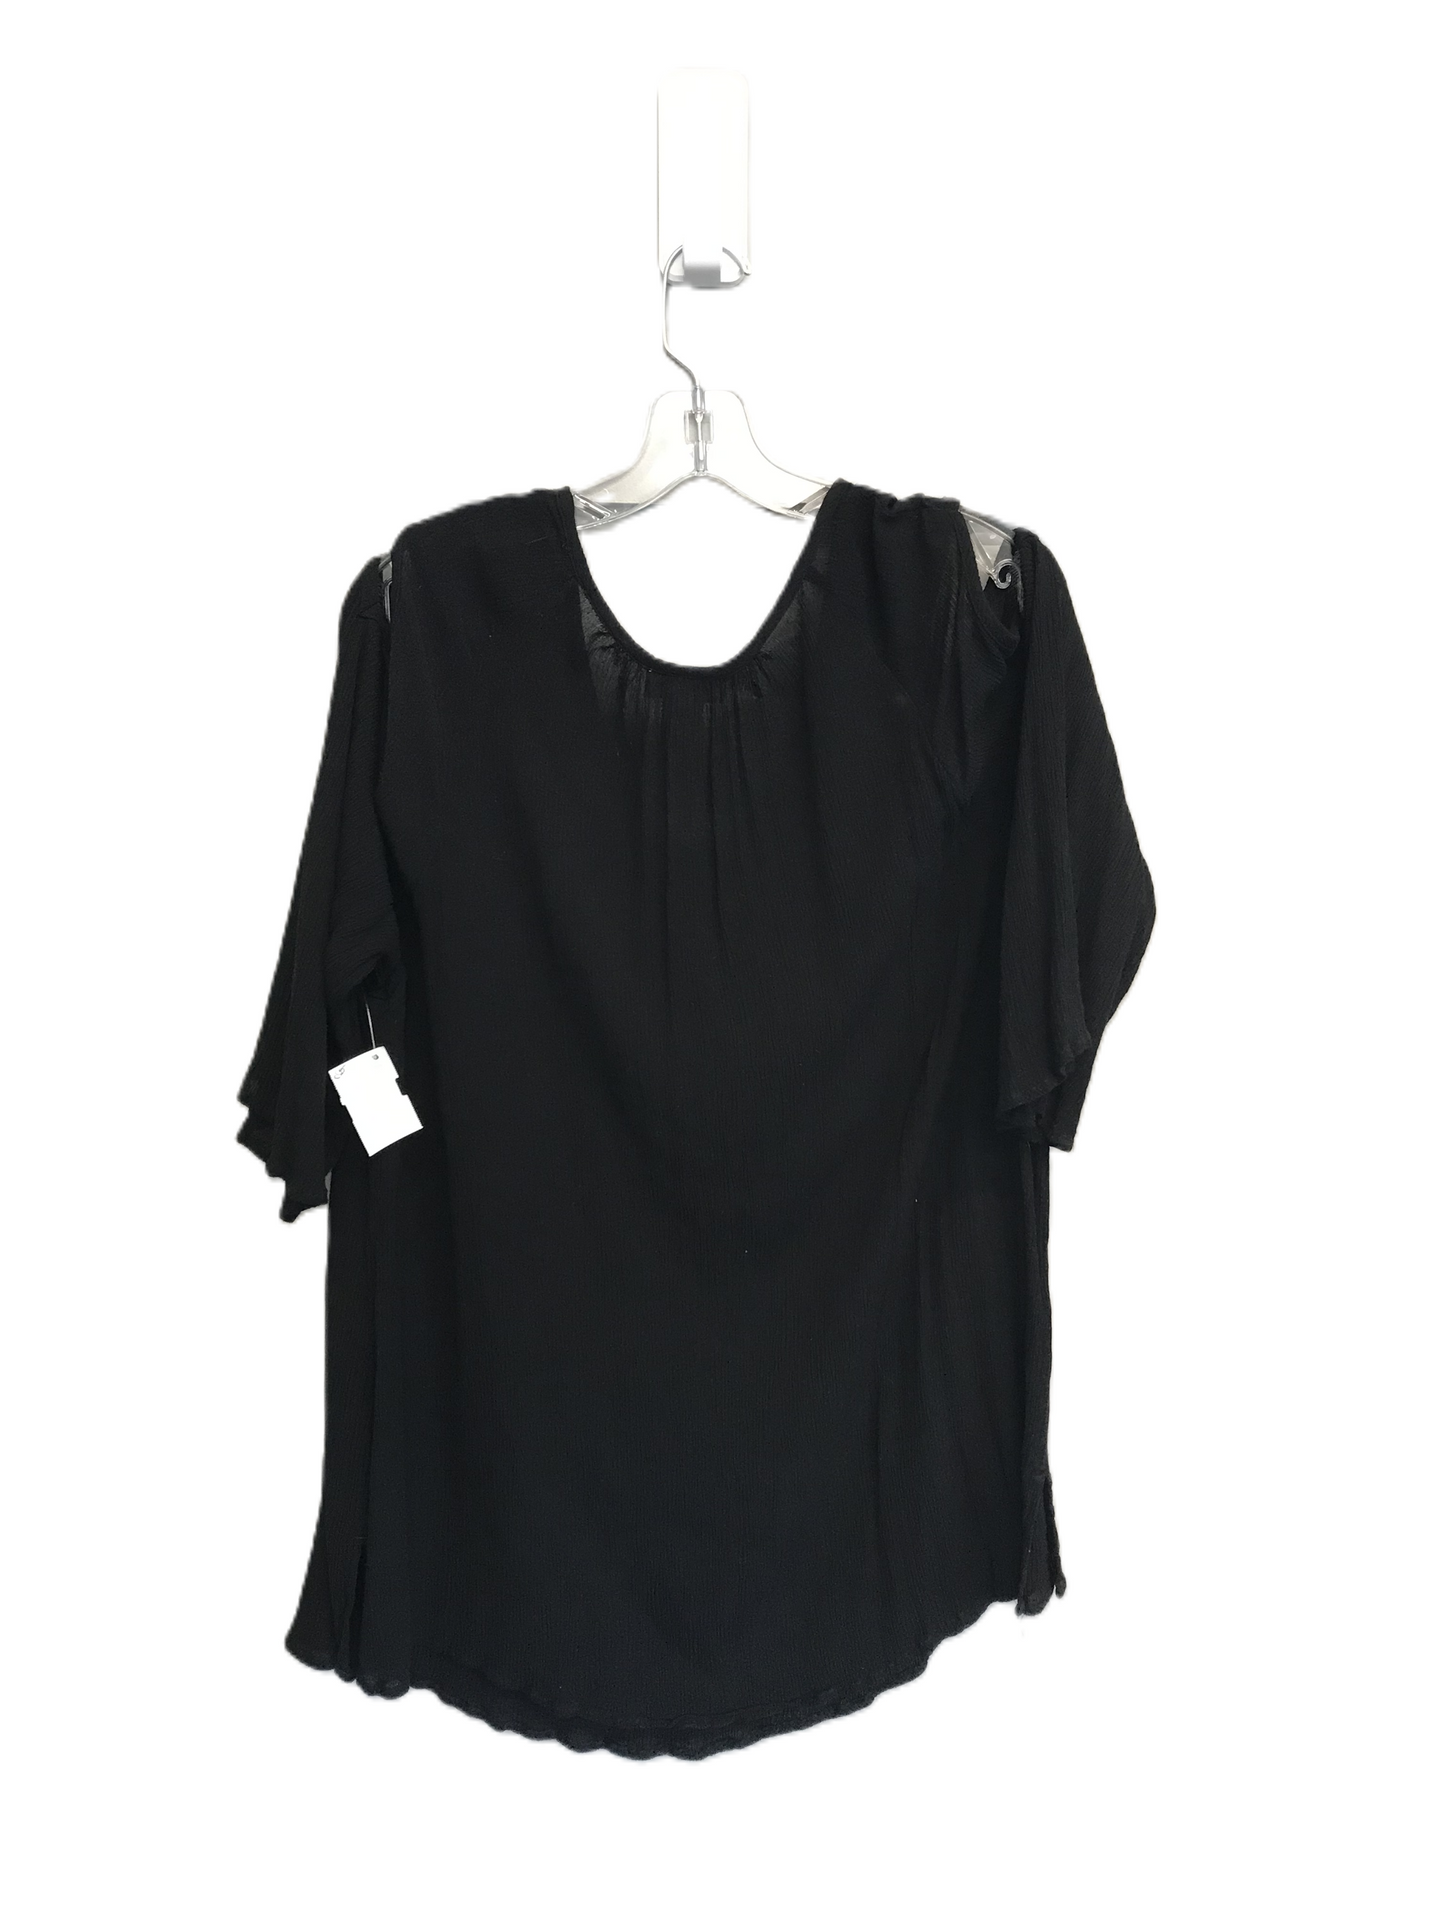 Black & White Top Long Sleeve By Catherines, Size: 3x